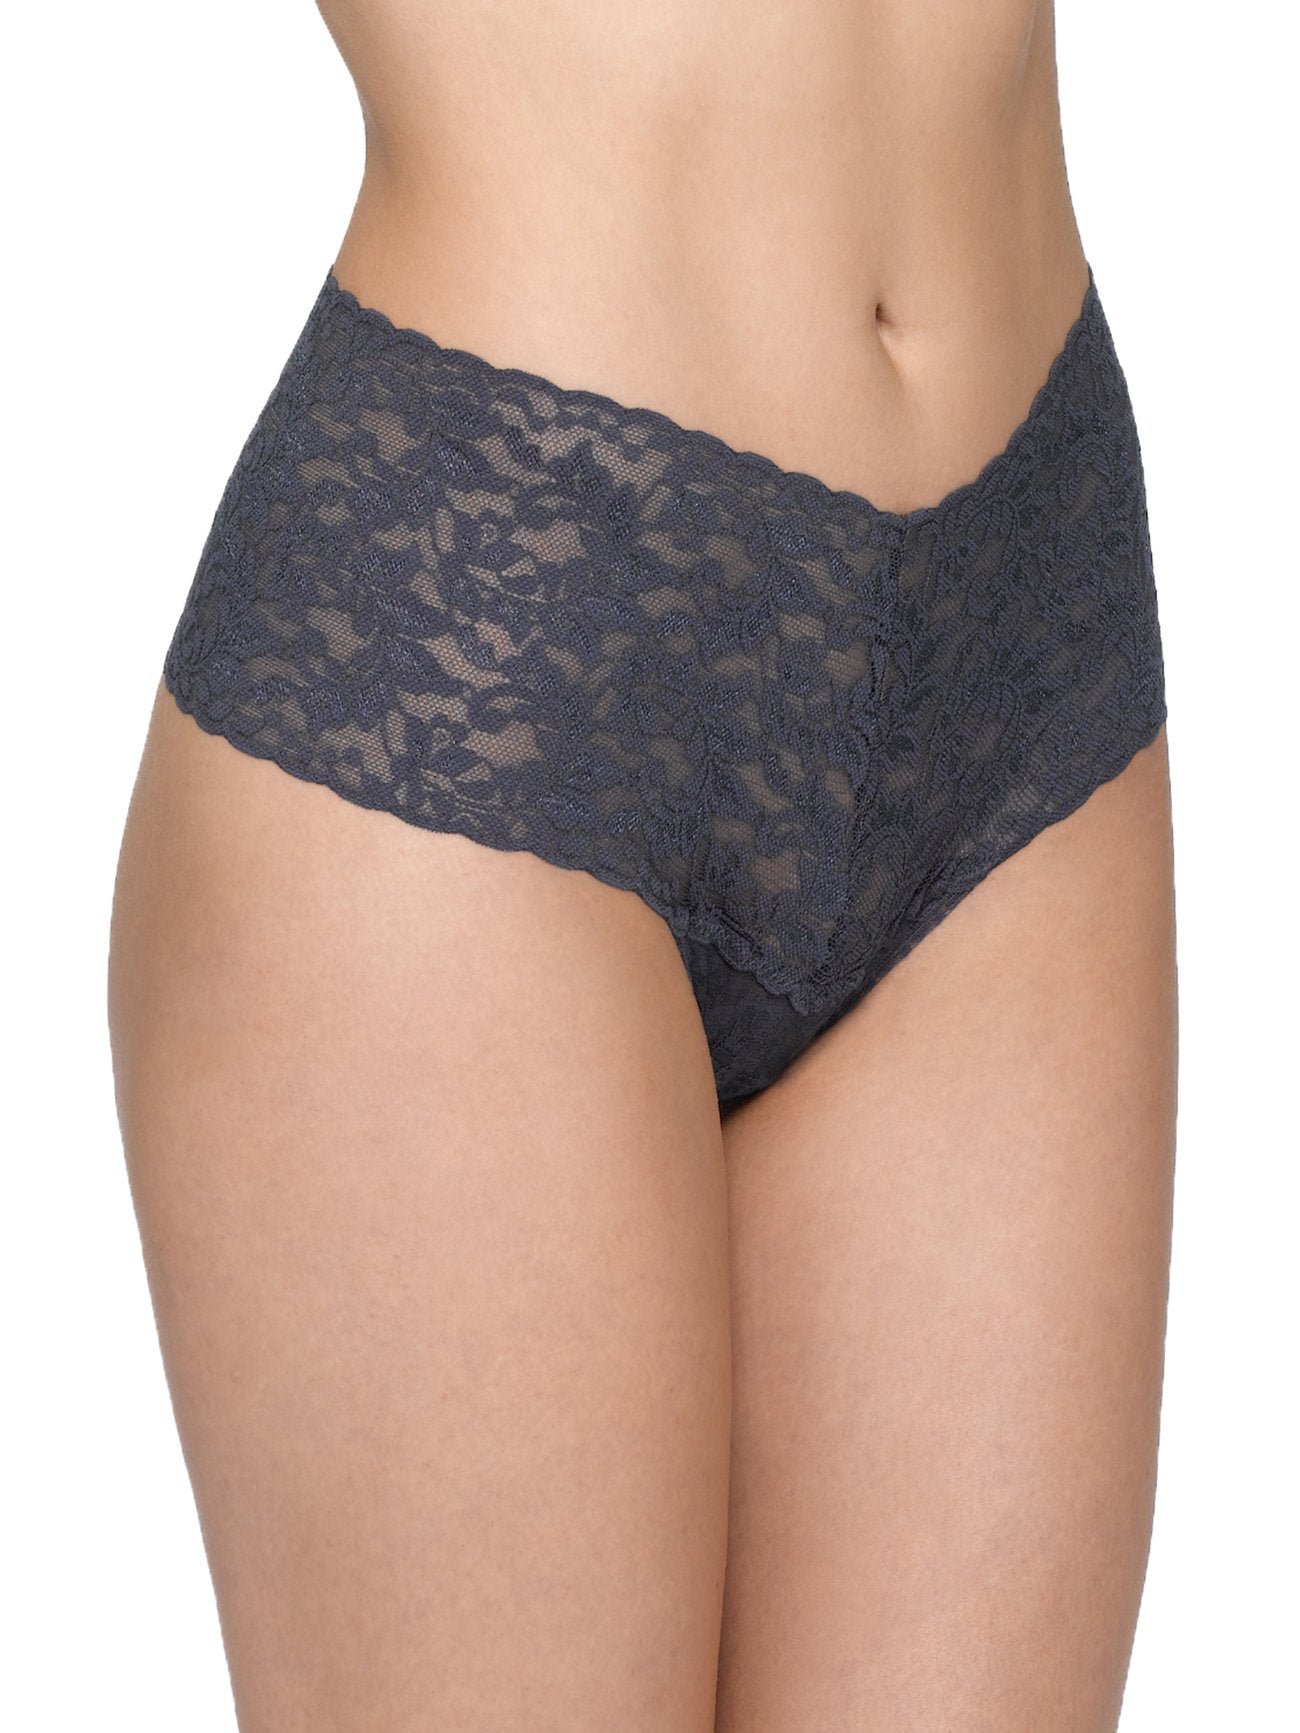 Retro Lace Thong Granite Packaged